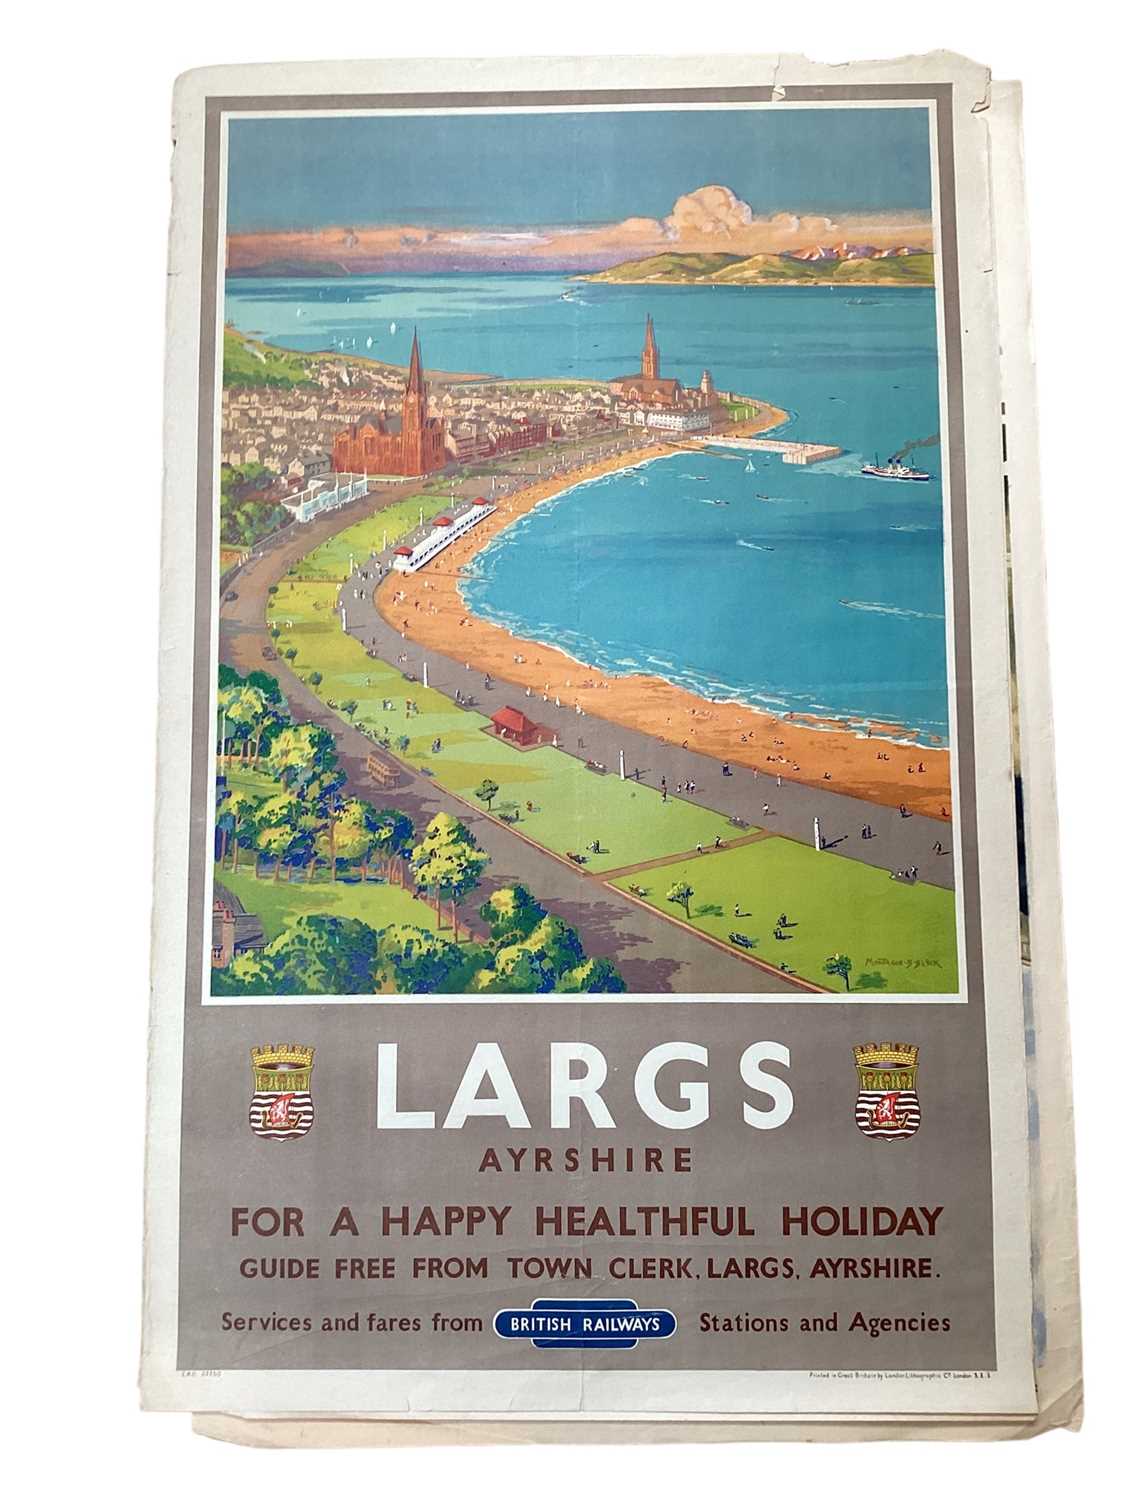 Original British Railways poster for Largs, with artwork by Montague B. Black, printed by London Lit